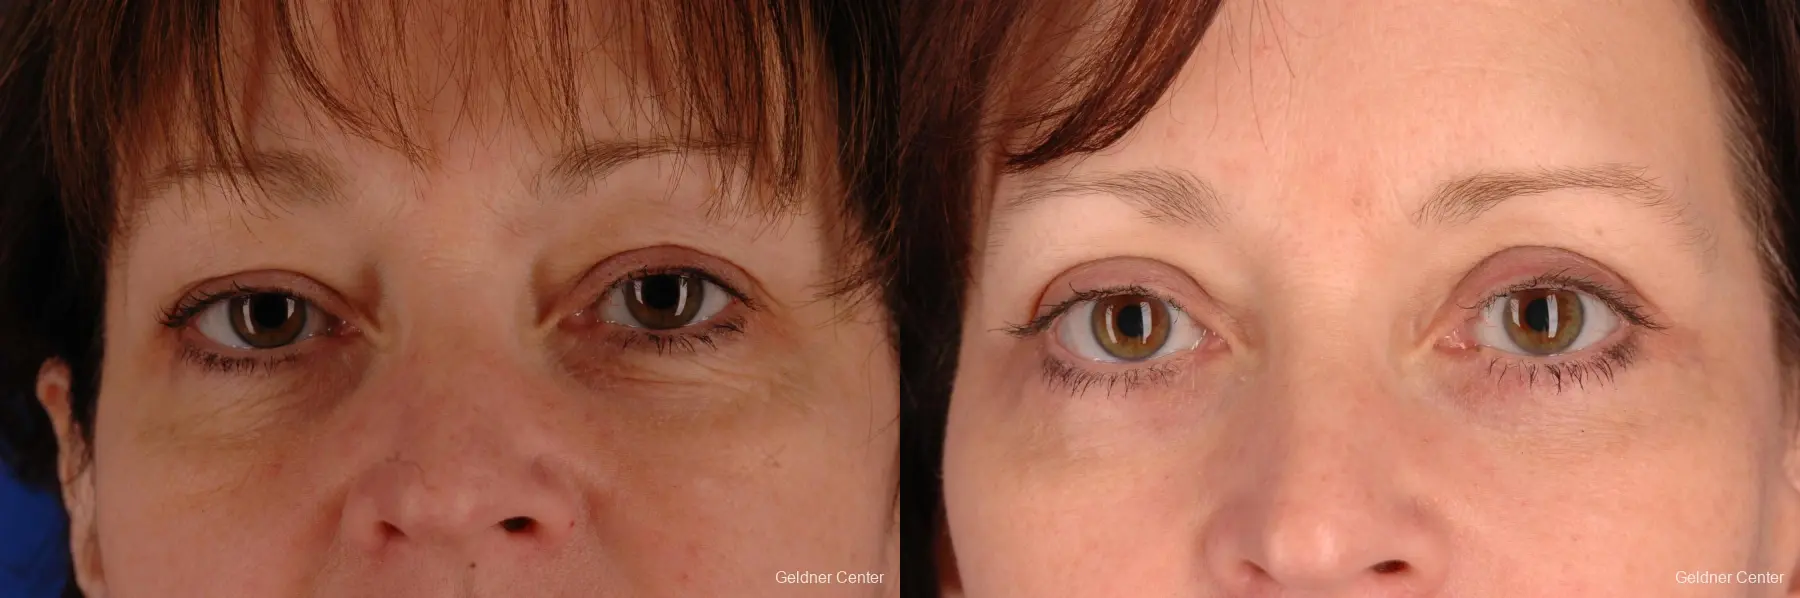 Chicago Eyelid Lift 2323 - Before and After 1